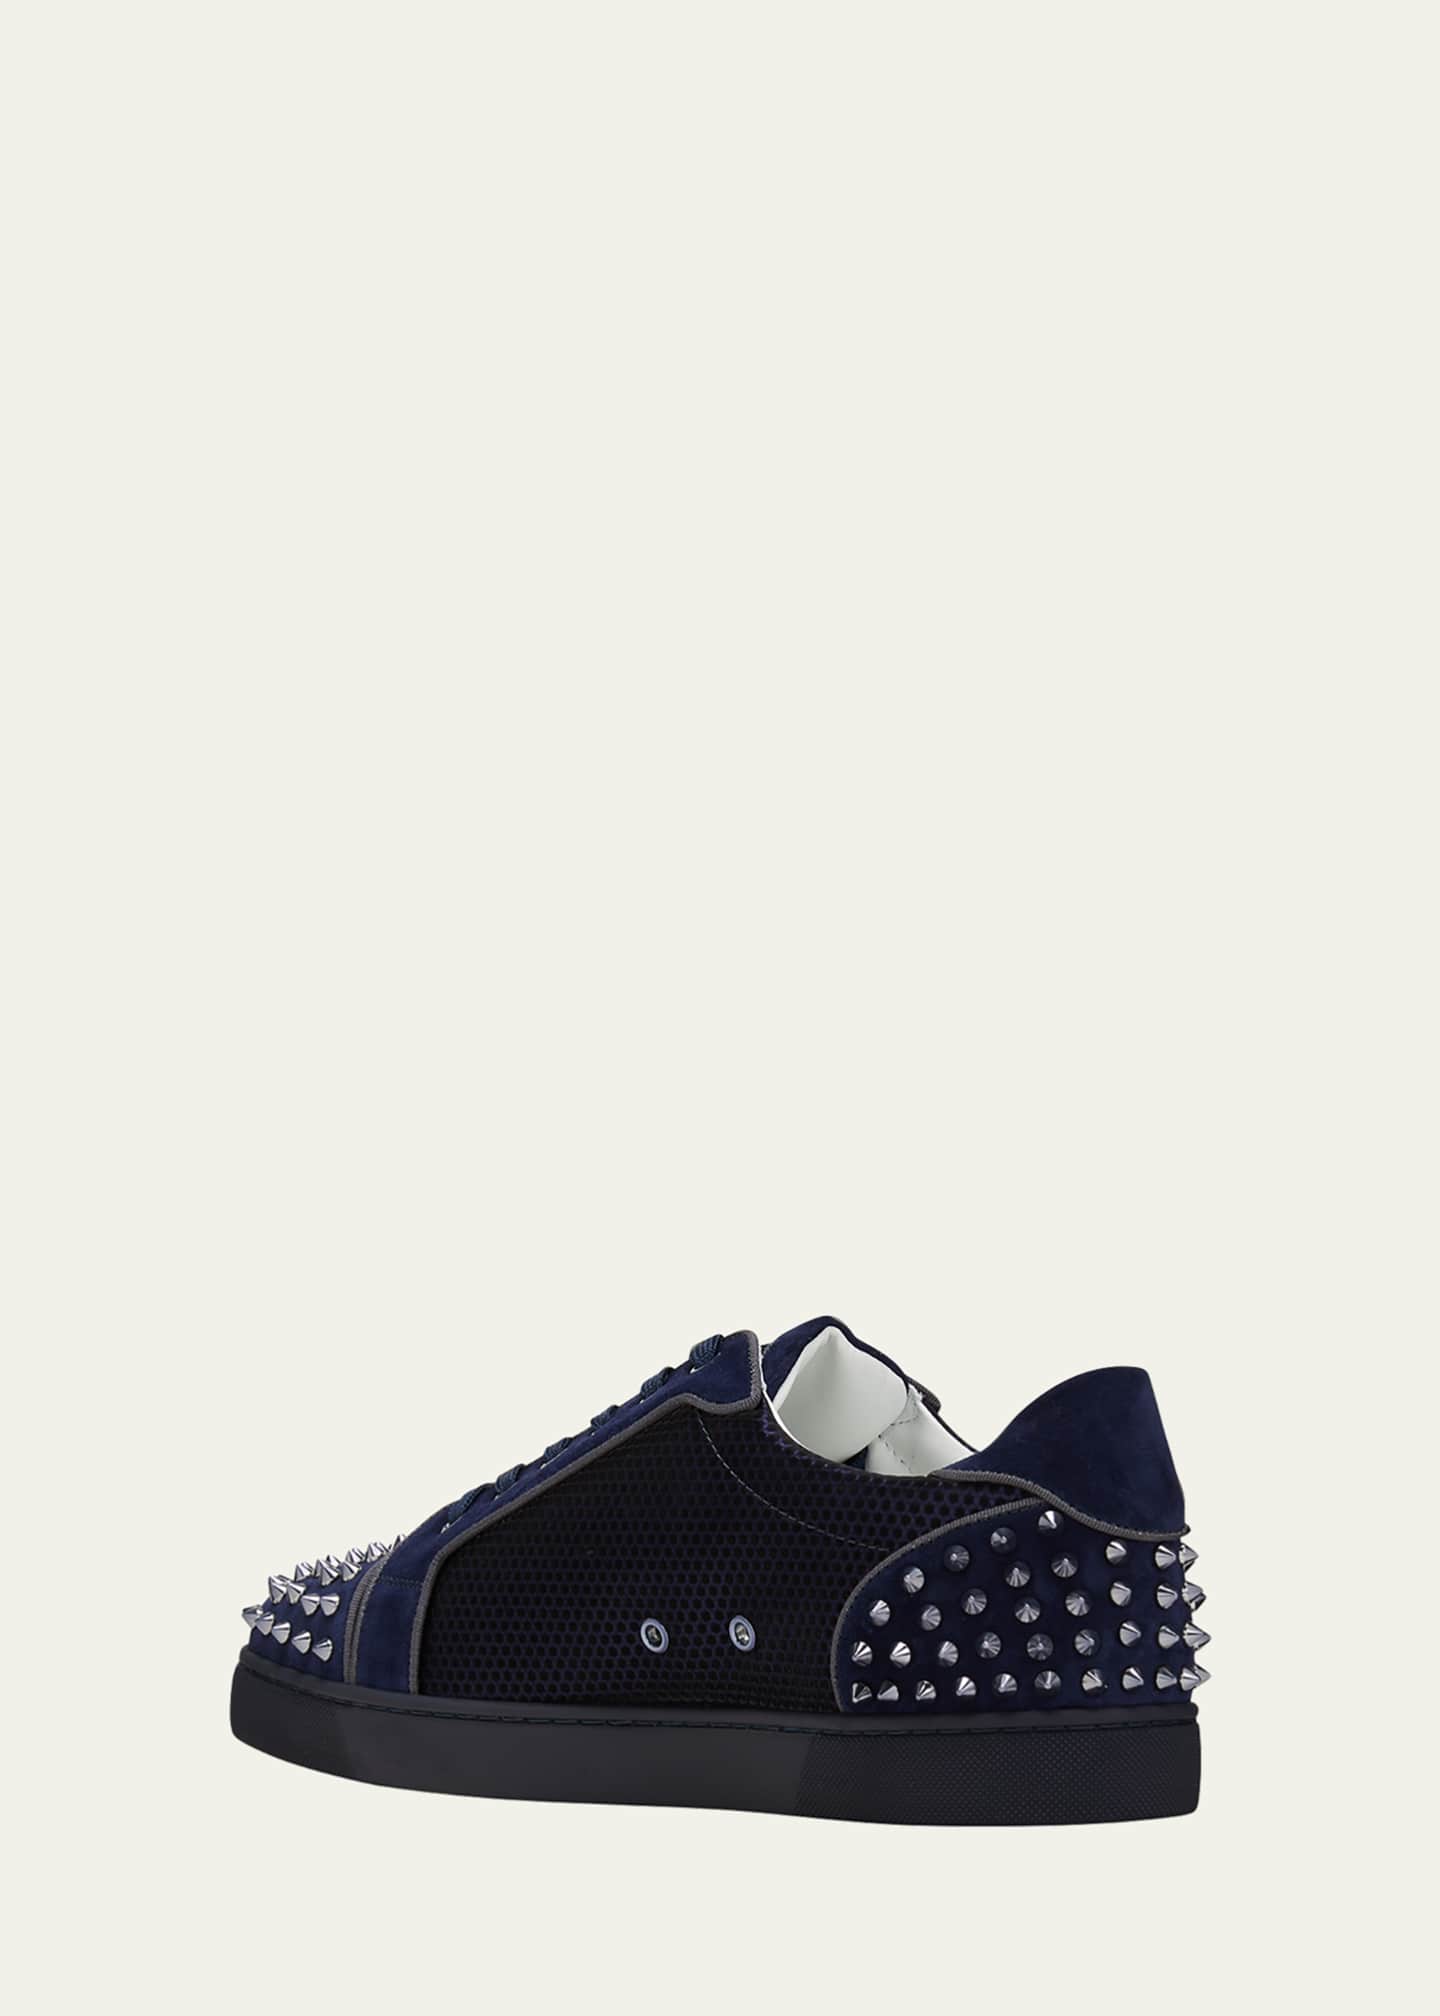 Christian Louboutin Lou Spike White And Blue Sneakers New Size 39 US 6